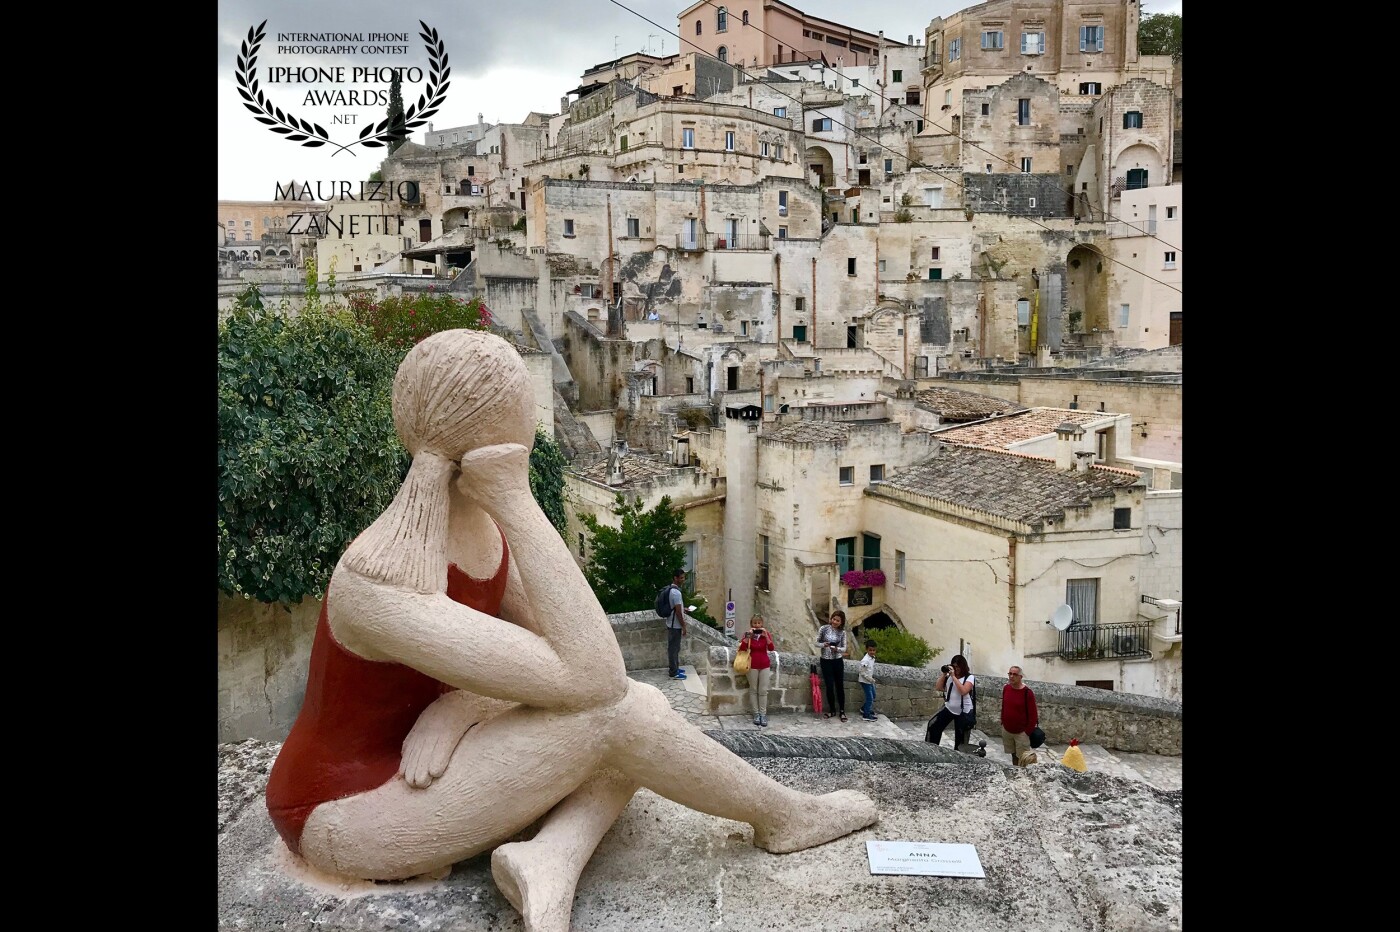 Matera and its "SASSI" in itself is an incredible, magical city. If among old houses, caves, churches, you will find a splendid art exhibition that makes its setting in the SASSI, you can easily get to the wonder. With the iPhone always in your pocket taking a picture is a must.